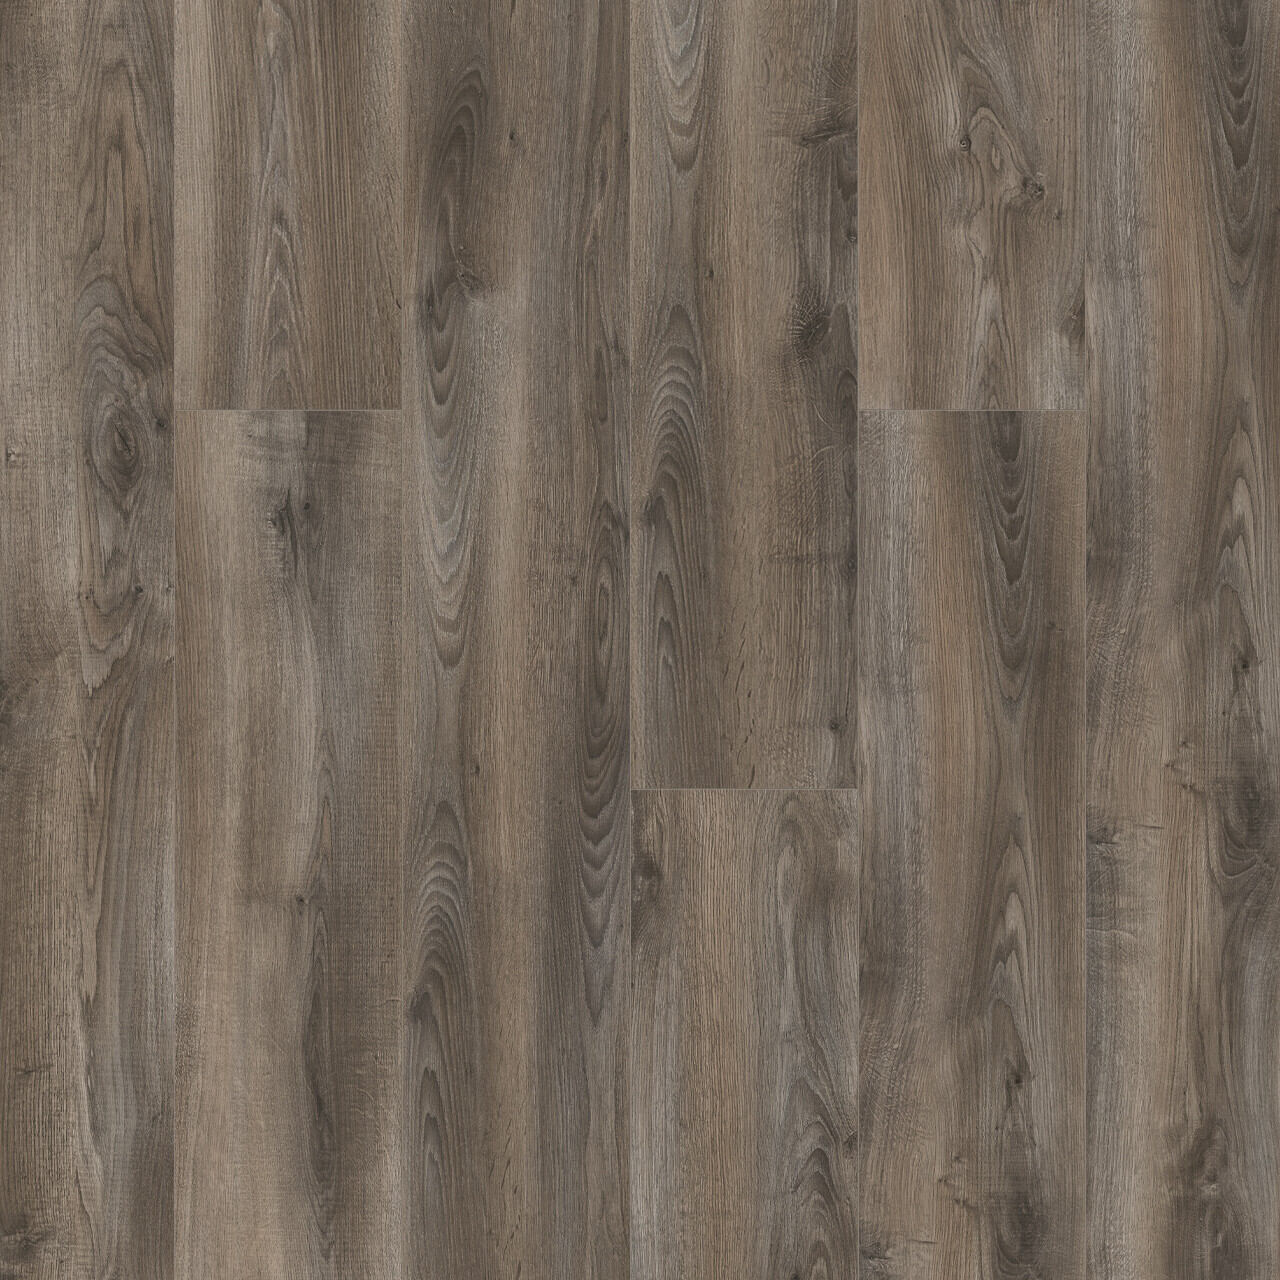 Engineered Floors - Wood Lux Collection - 8 in. x 54 in. - Costa Brava